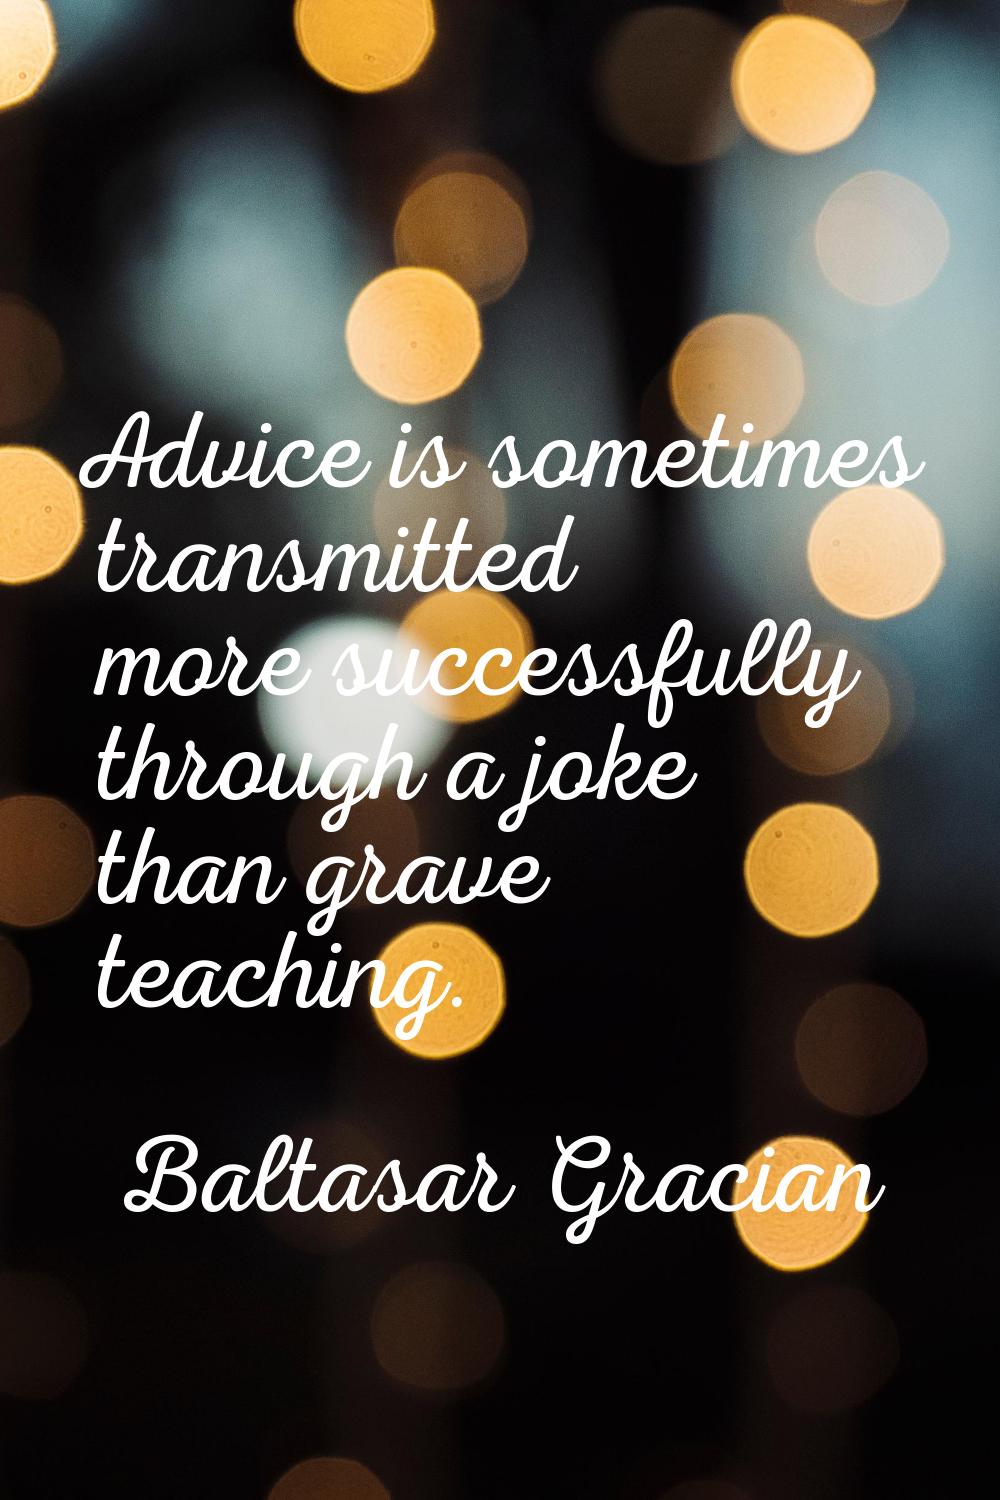 Advice is sometimes transmitted more successfully through a joke than grave teaching.